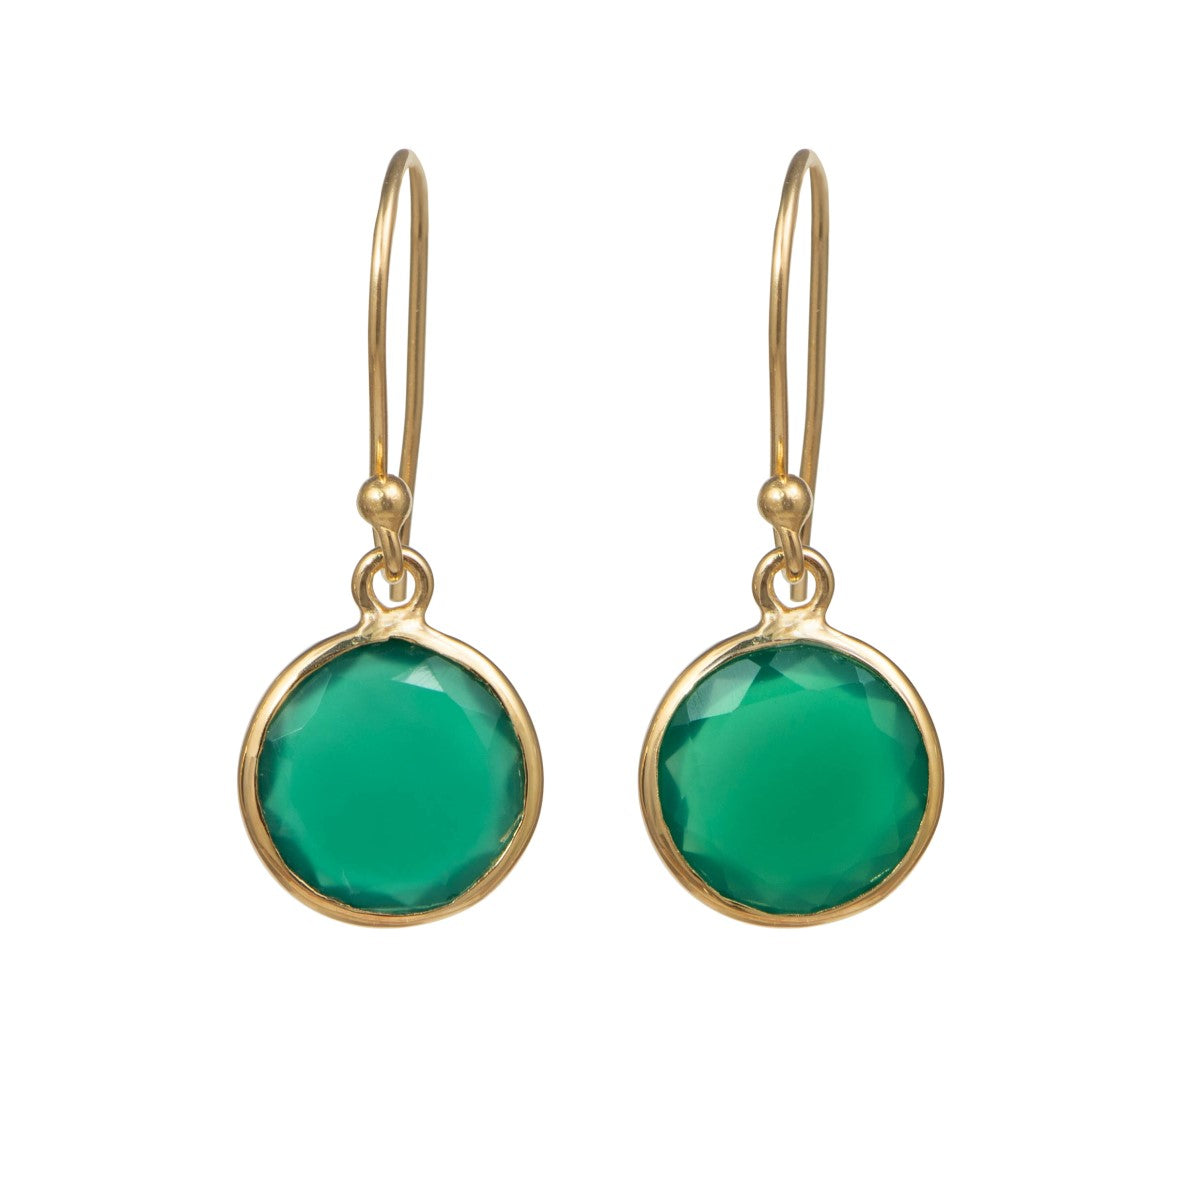 Green Onyx Gold Plated Sterling Silver Earrings with a Round Faceted Gemstone Drop